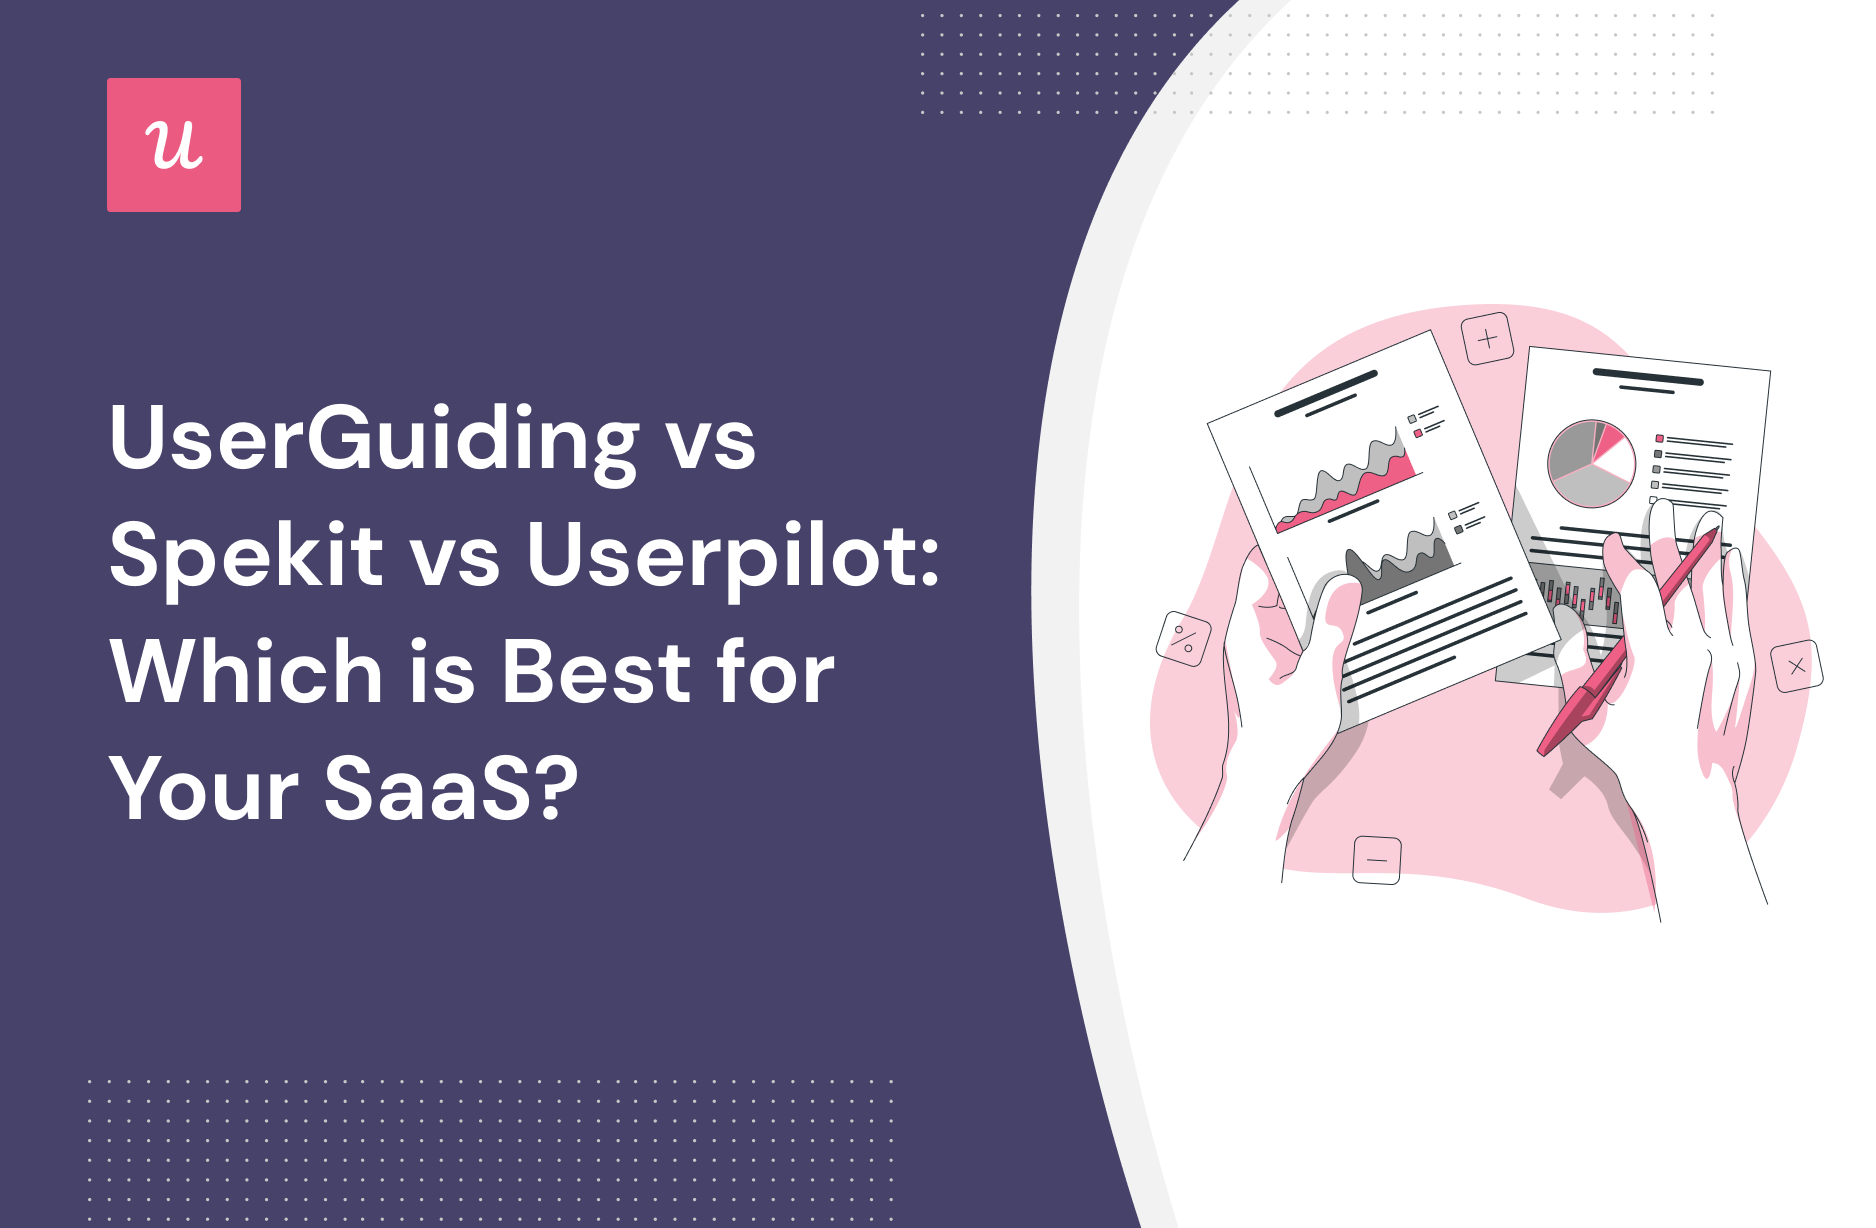 UserGuiding vs Spekit vs Userpilot: Which is Best for Your SaaS?